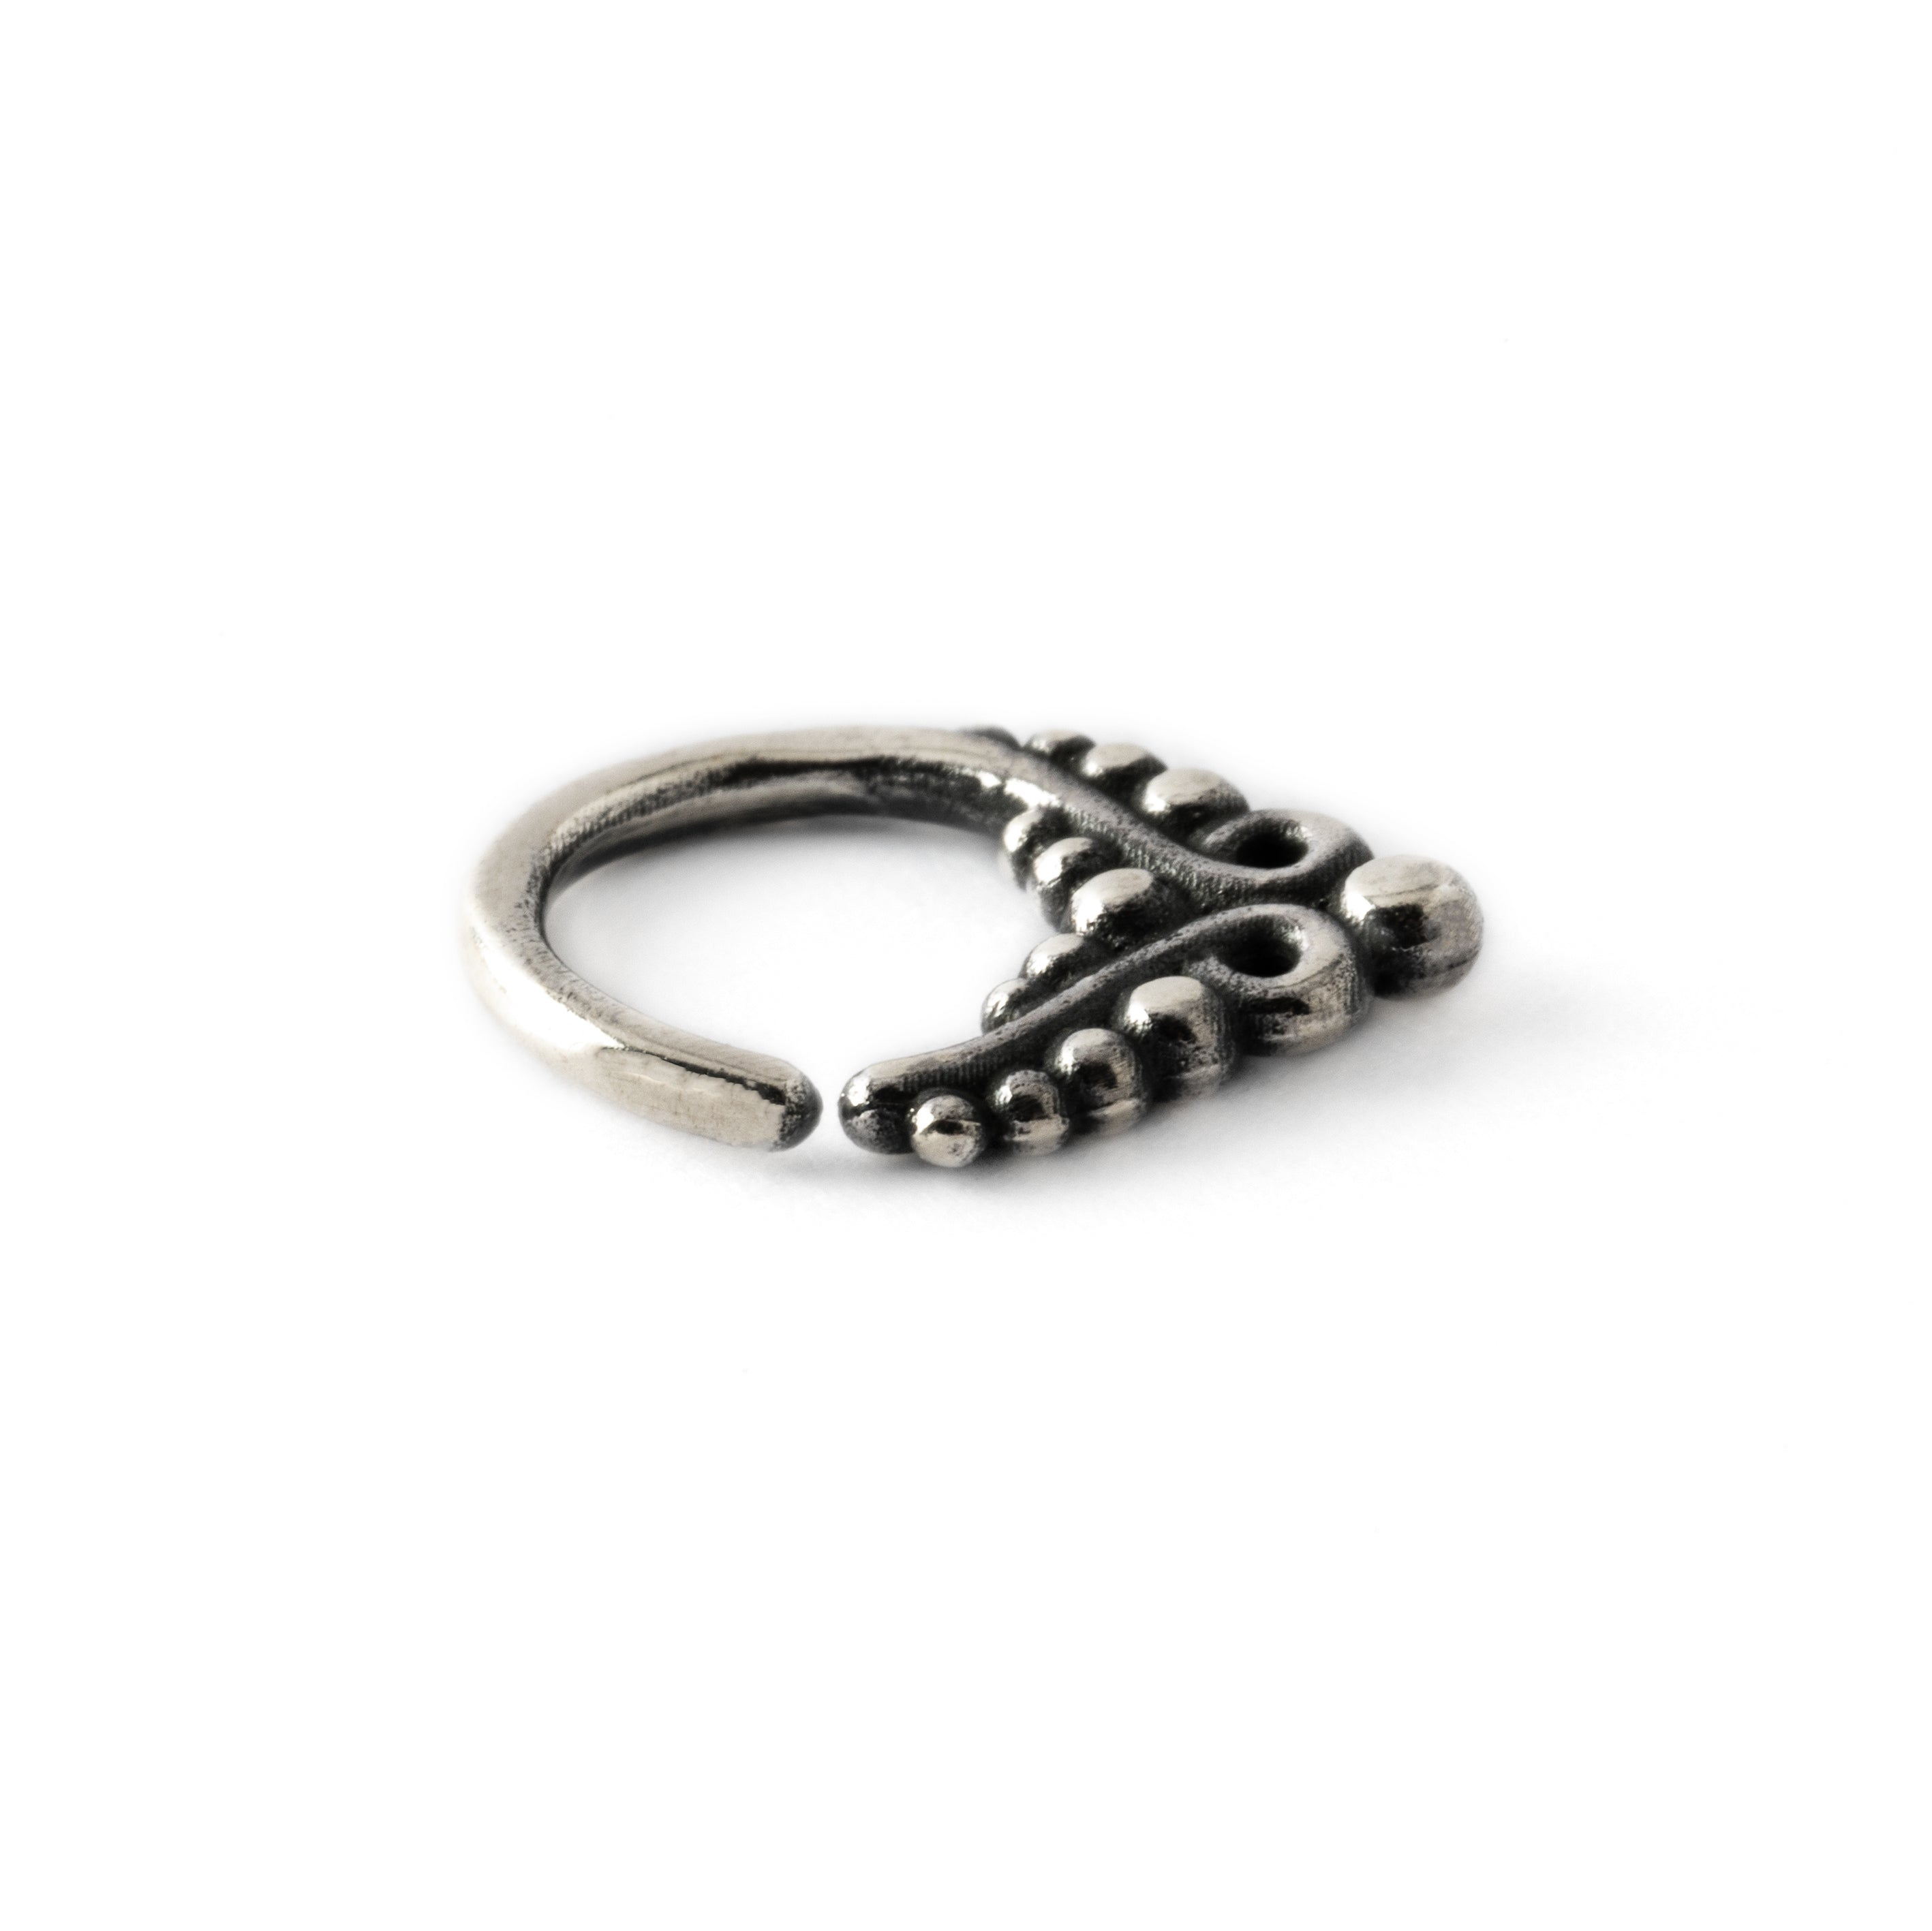 6mm, 8mm, 10mm silver septum ring teardrop shaped with dots and curved ornaments side view